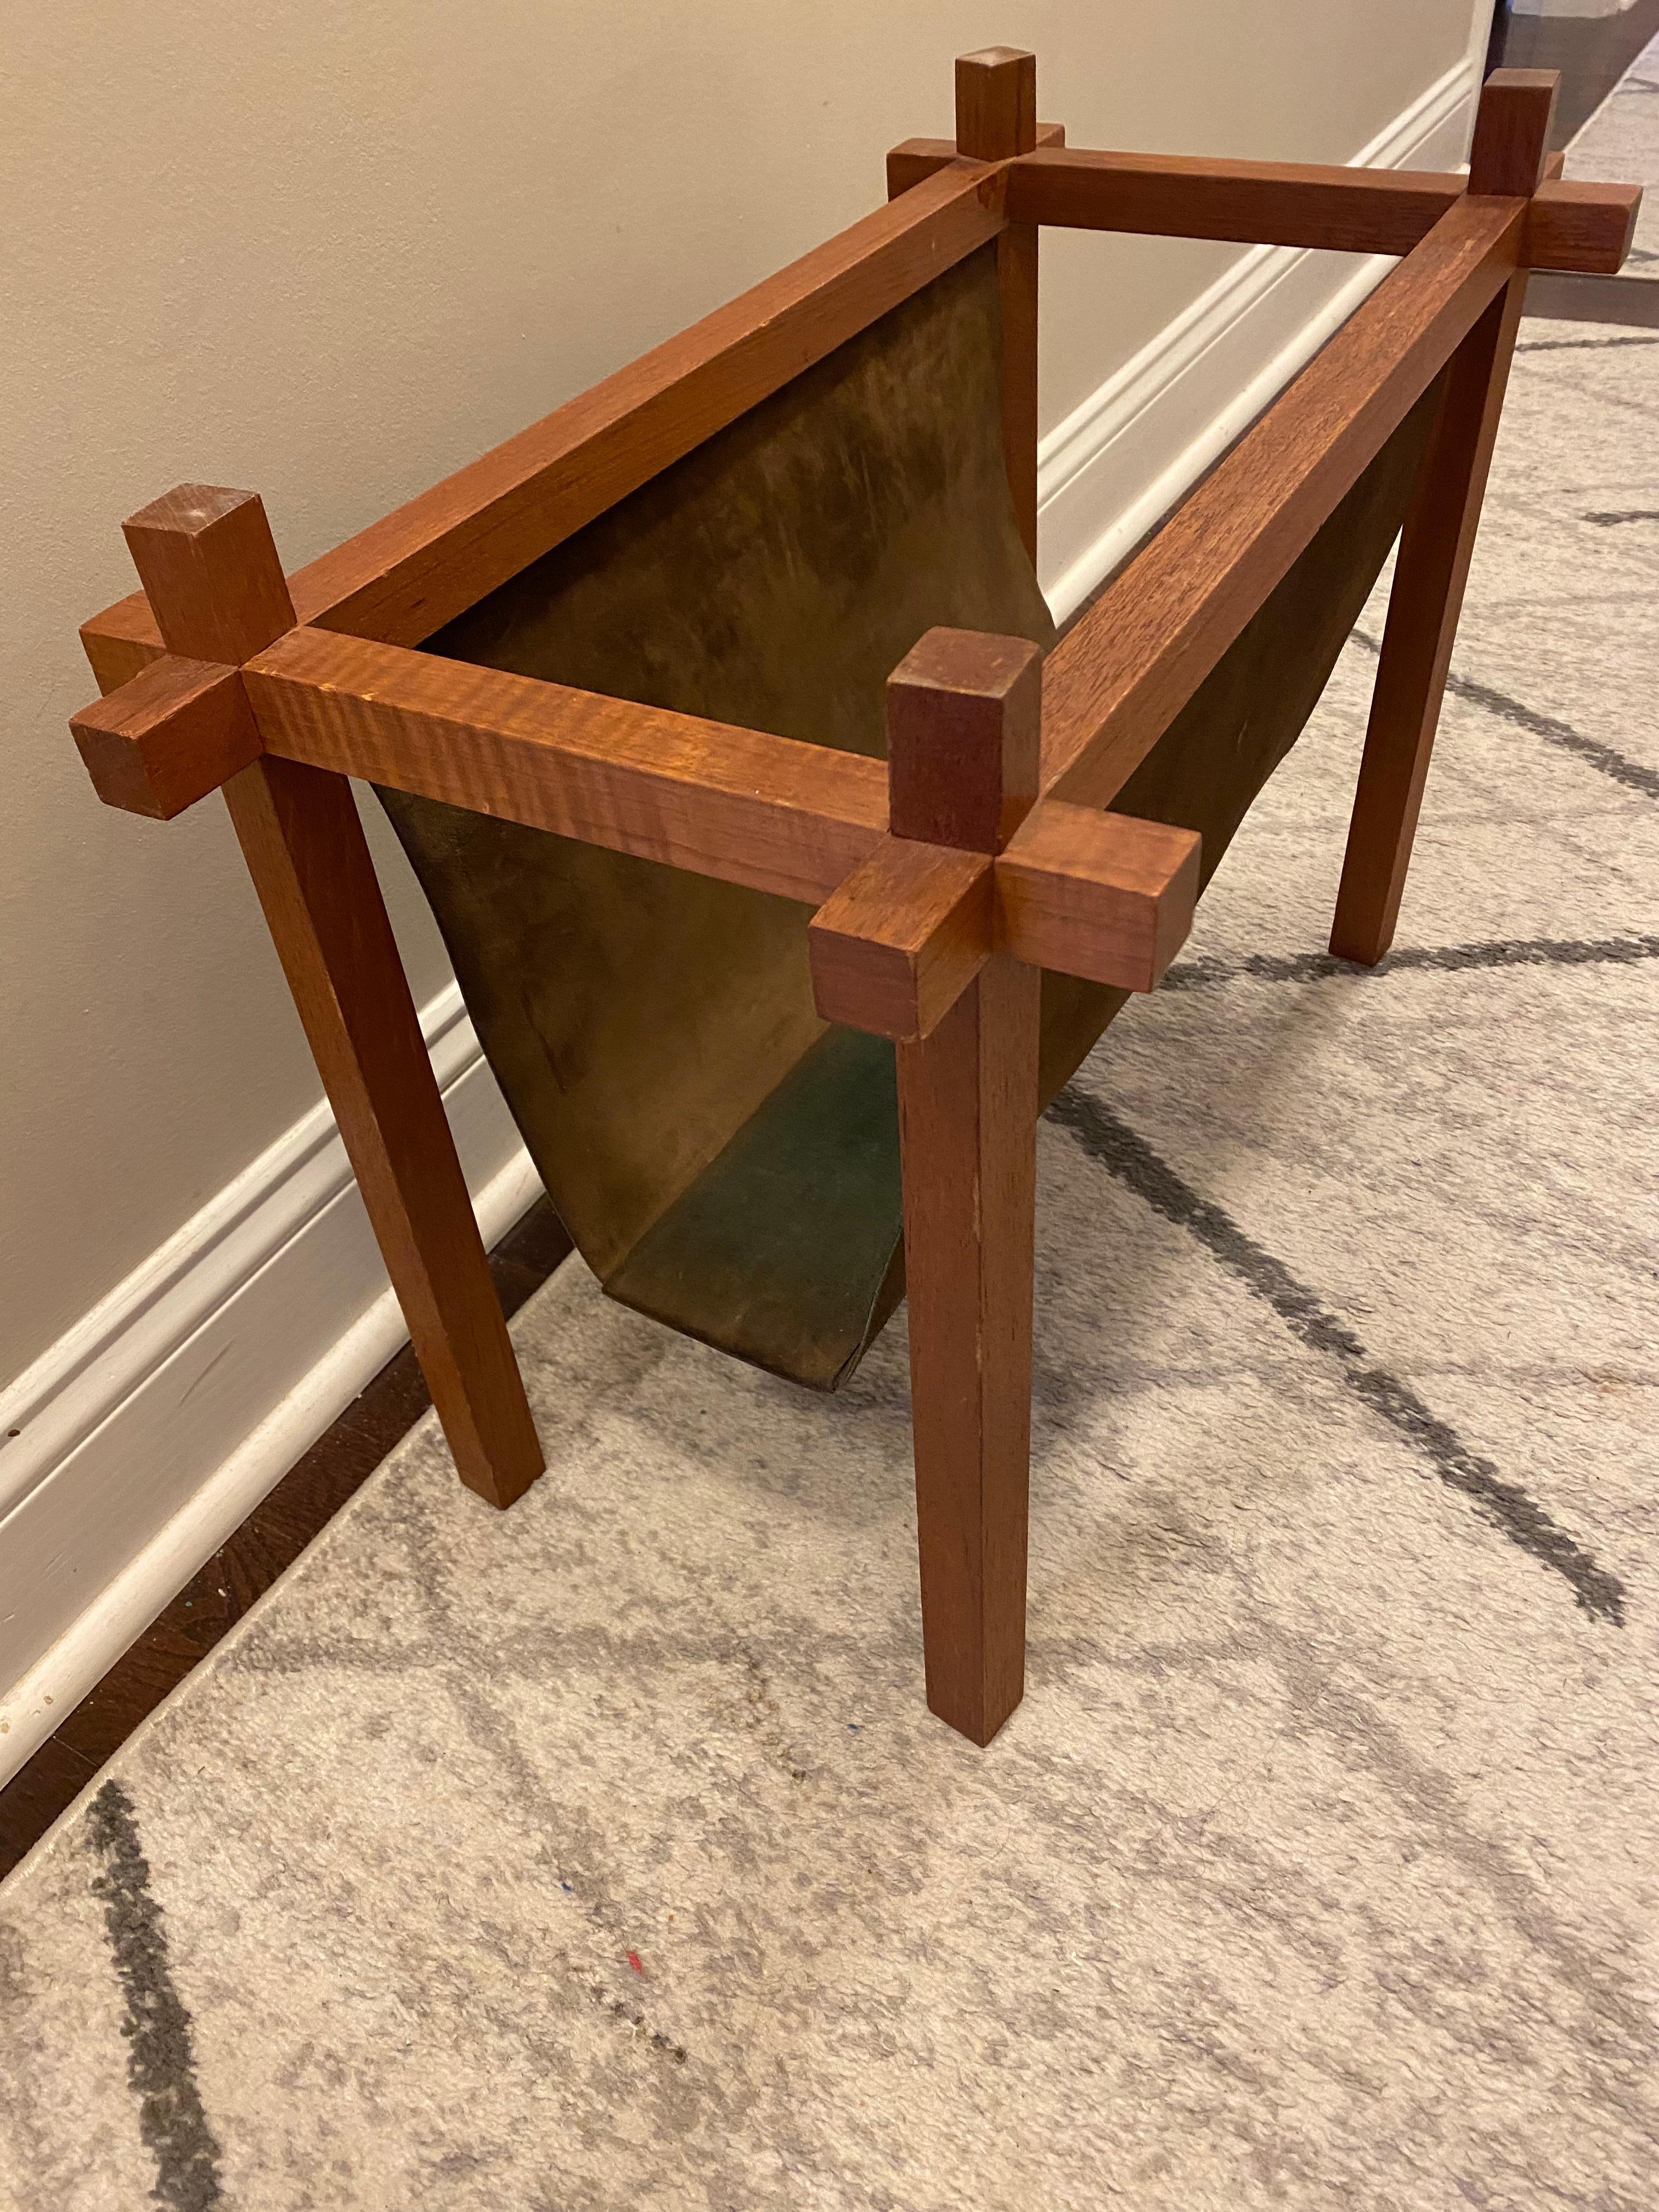 Walnut and Suede Mid-Century Modern magazine rack. Square legs with a chocolate brown suede sling with squared underside.